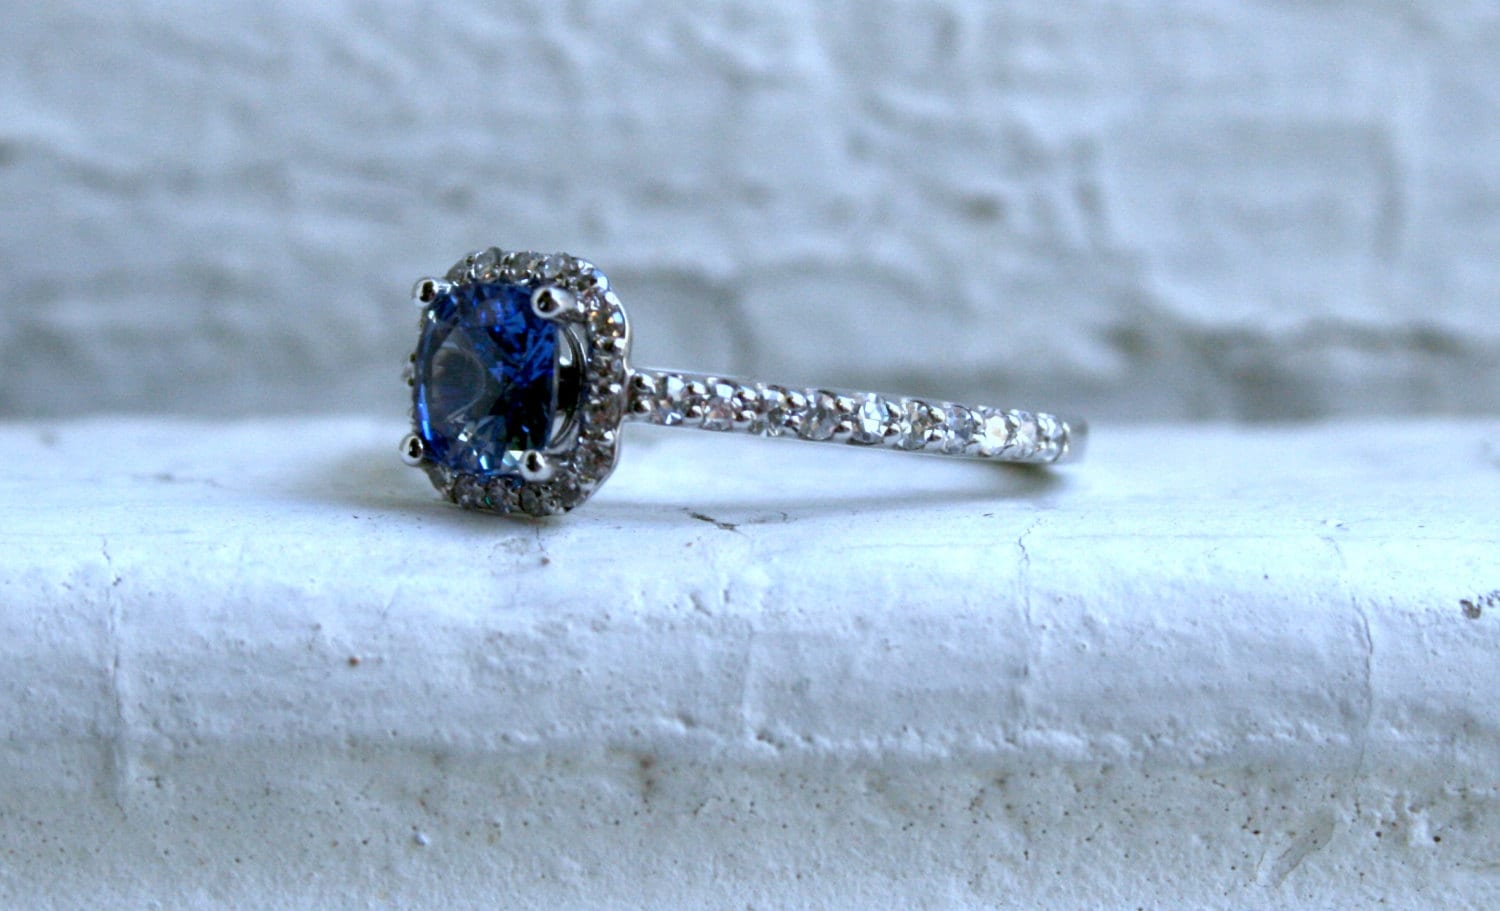 14K White Gold Pave Diamond and Sapphire Halo Ring - 1.26ct.